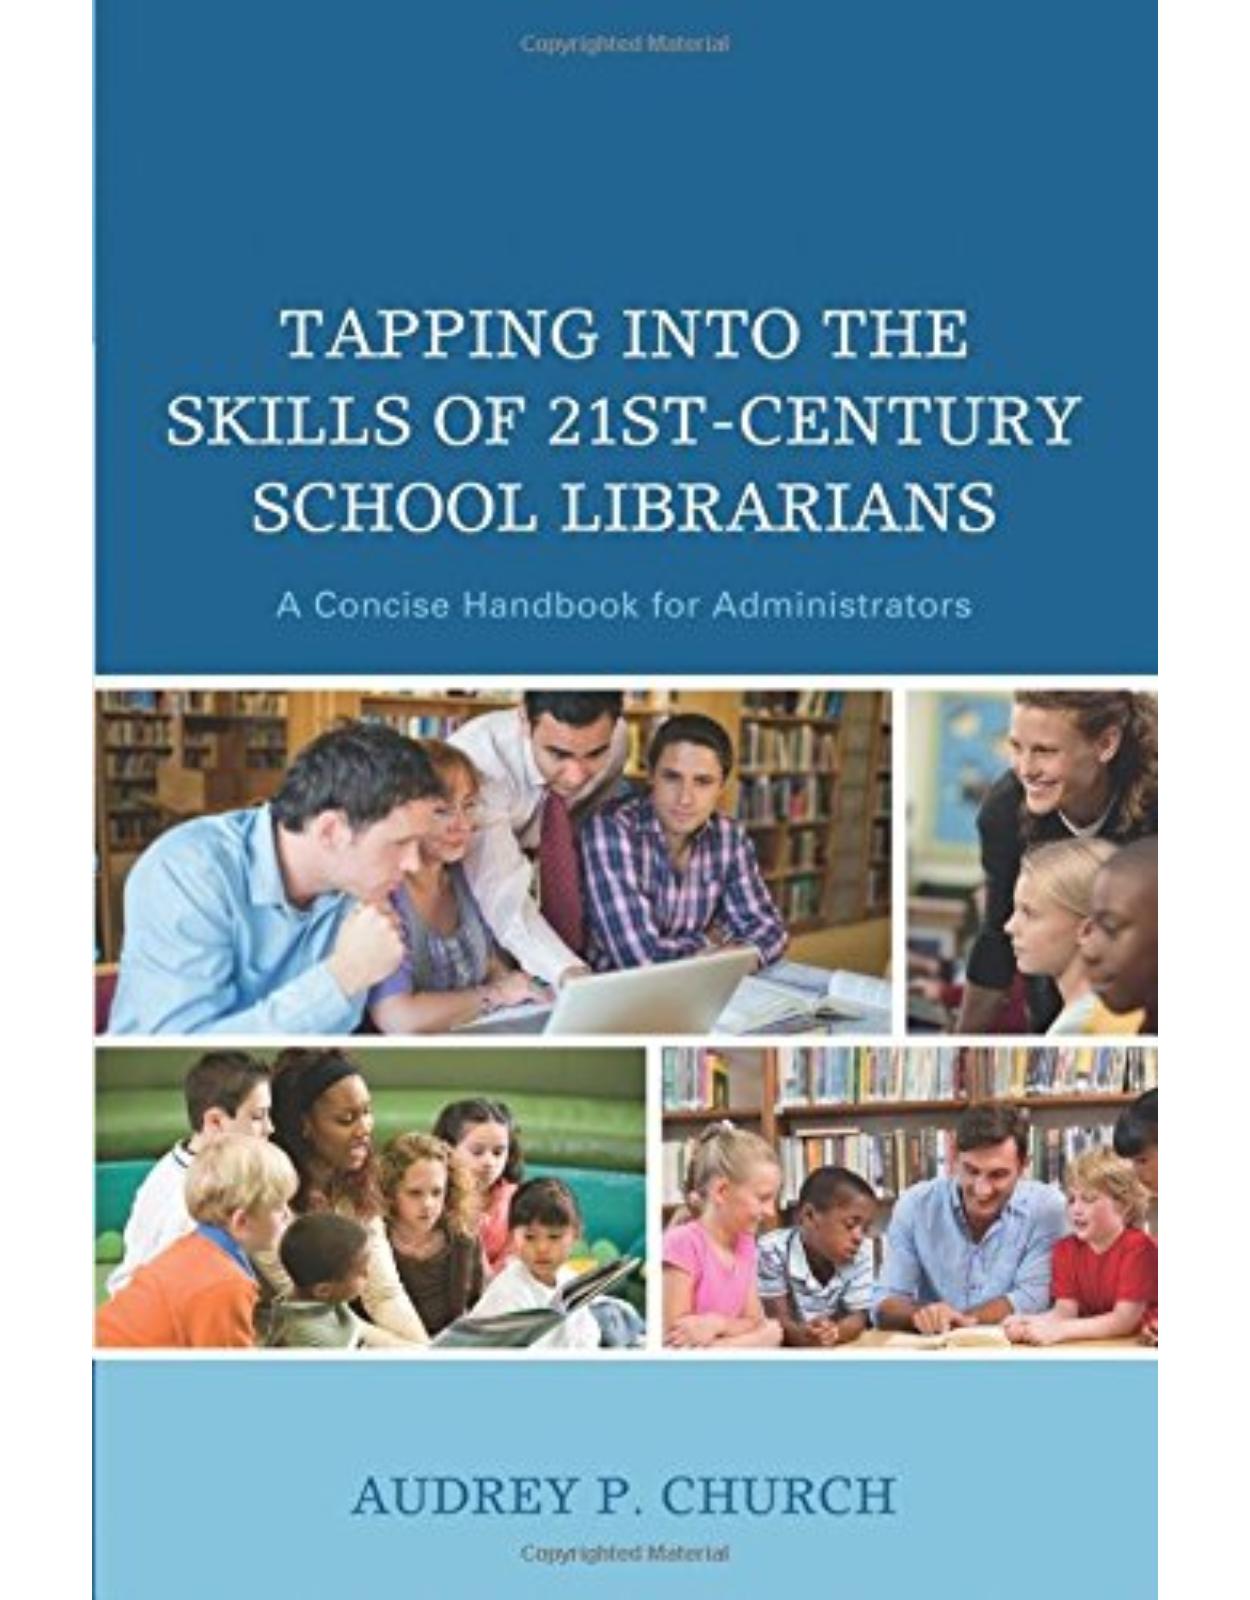 Tapping into the Skills of 21st-Century School Librarians  A Concise Handbook for Administrators